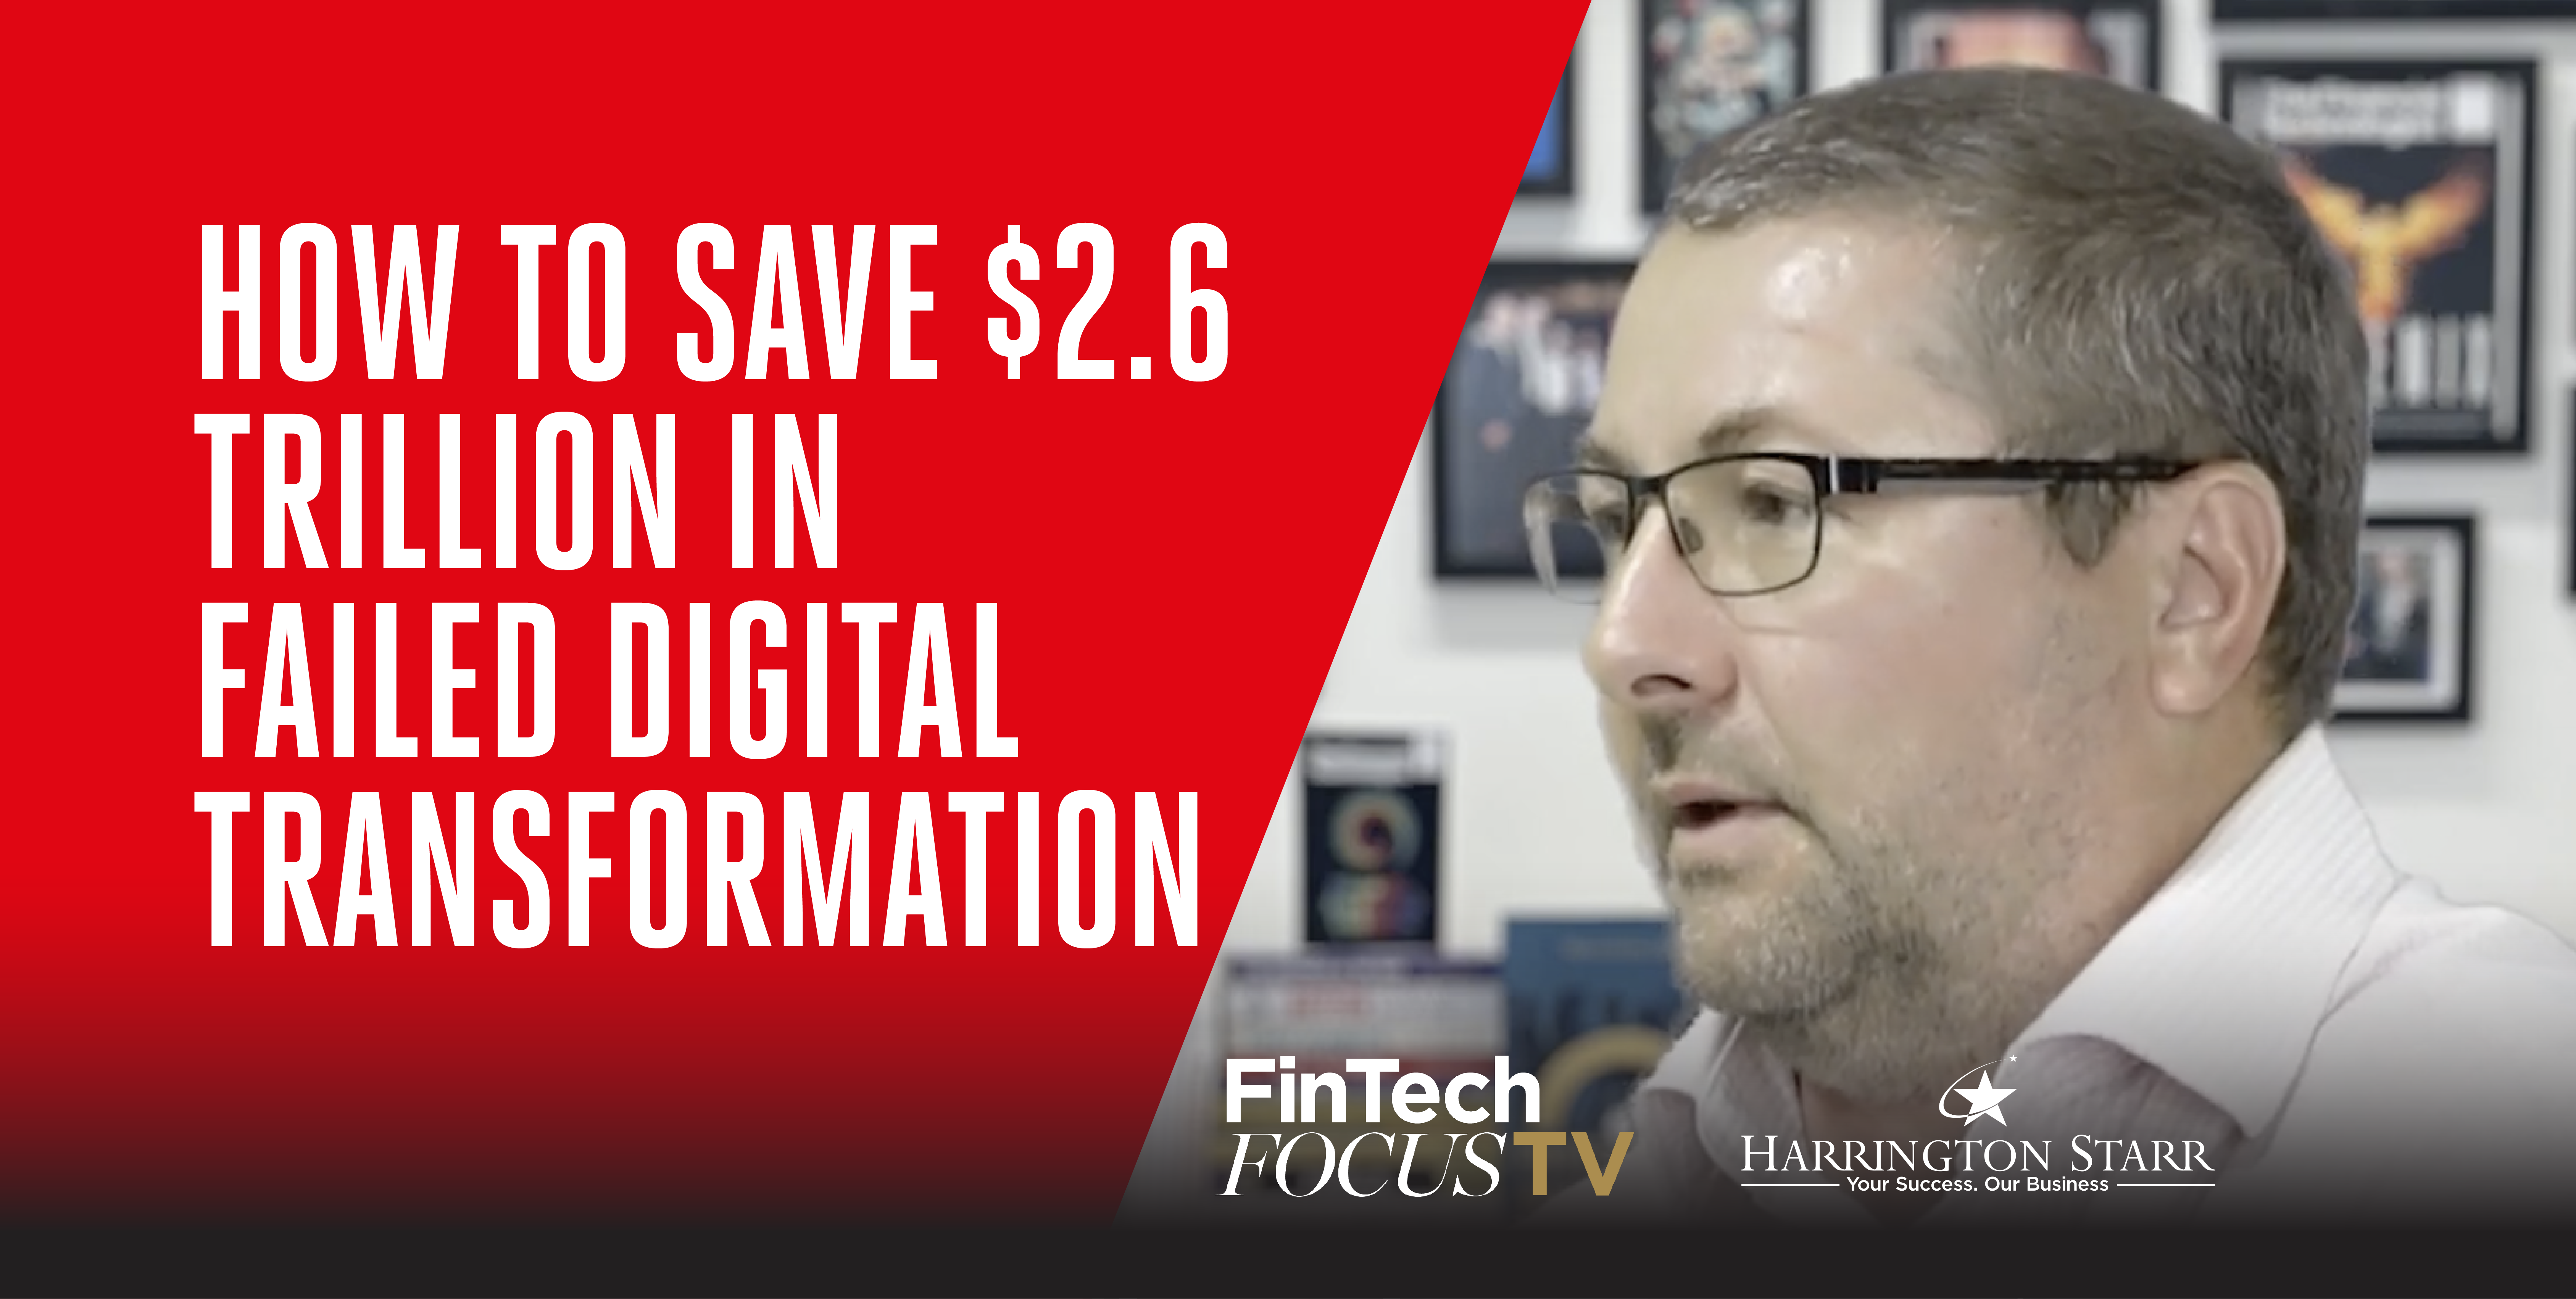 How to Save $2.6 Trillion in Failed Digital Transformation